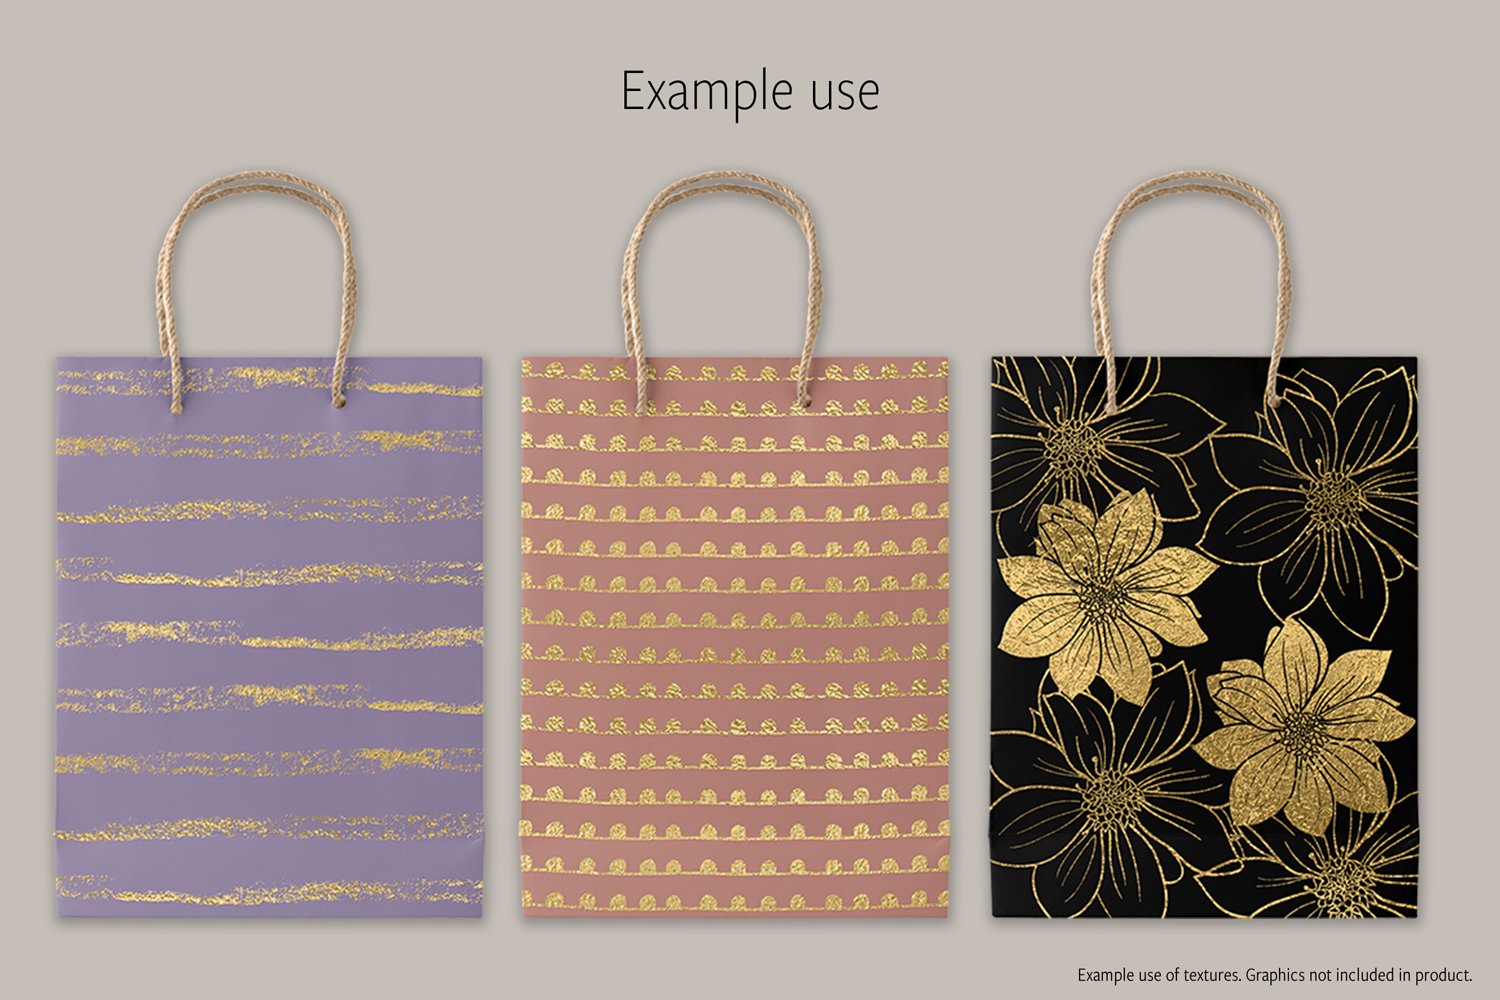 Festive eco bag with gold elements.